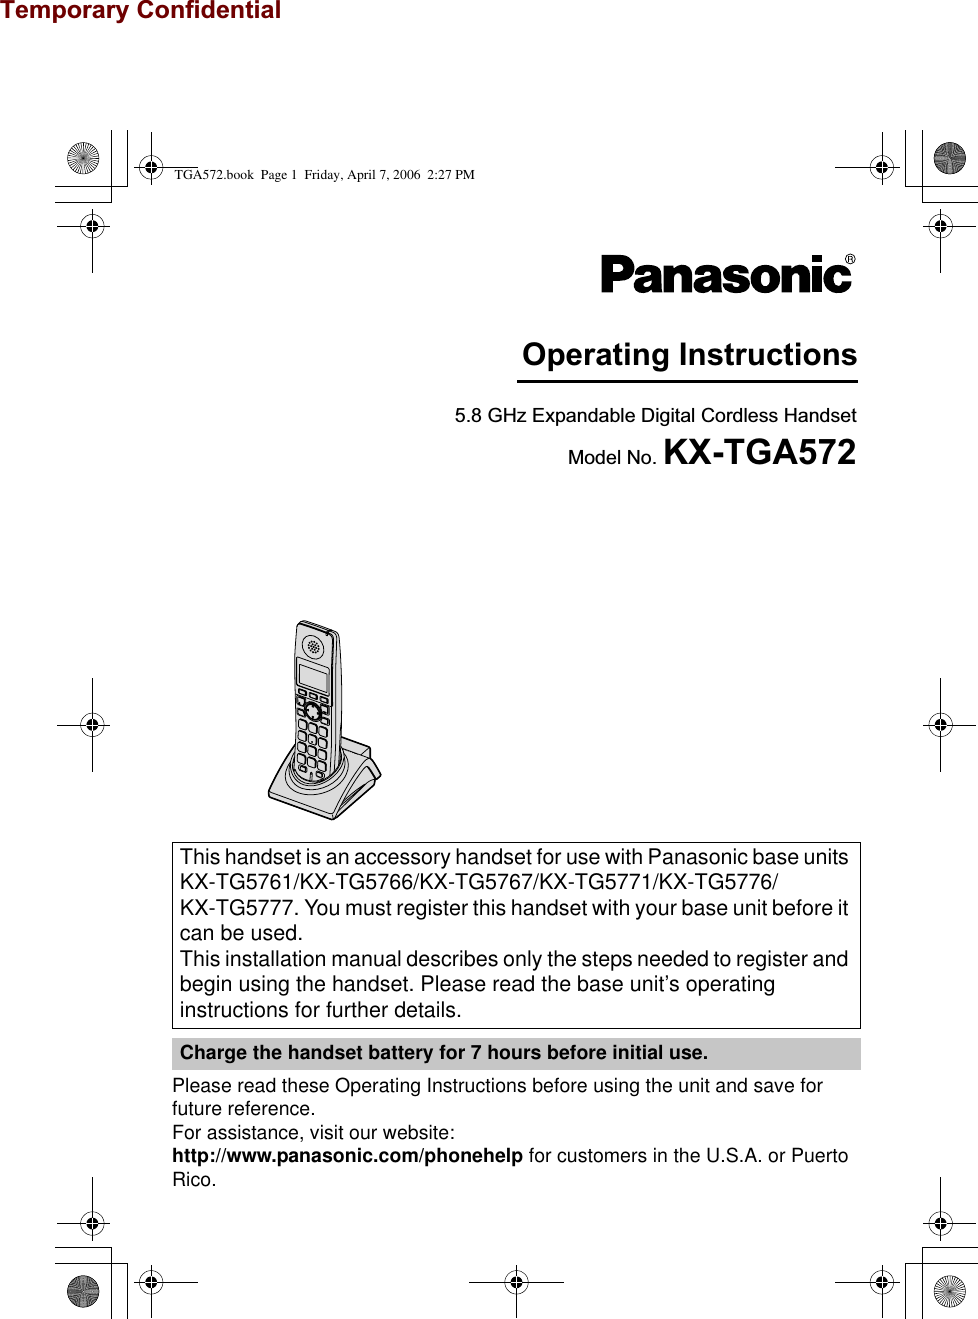 Temporary ConfidentialPlease read these Operating Instructions before using the unit and save for future reference.For assistance, visit our website:http://www.panasonic.com/phonehelp for customers in the U.S.A. or Puerto Rico.This handset is an accessory handset for use with Panasonic base units KX-TG5761/KX-TG5766/KX-TG5767/KX-TG5771/KX-TG5776/KX-TG5777. You must register this handset with your base unit before it can be used.This installation manual describes only the steps needed to register and begin using the handset. Please read the base unit’s operating instructions for further details.Charge the handset battery for 7 hours before initial use.Operating Instructions5.8 GHz Expandable Digital Cordless HandsetModel No. KX-TGA572TGA572.book  Page 1  Friday, April 7, 2006  2:27 PM